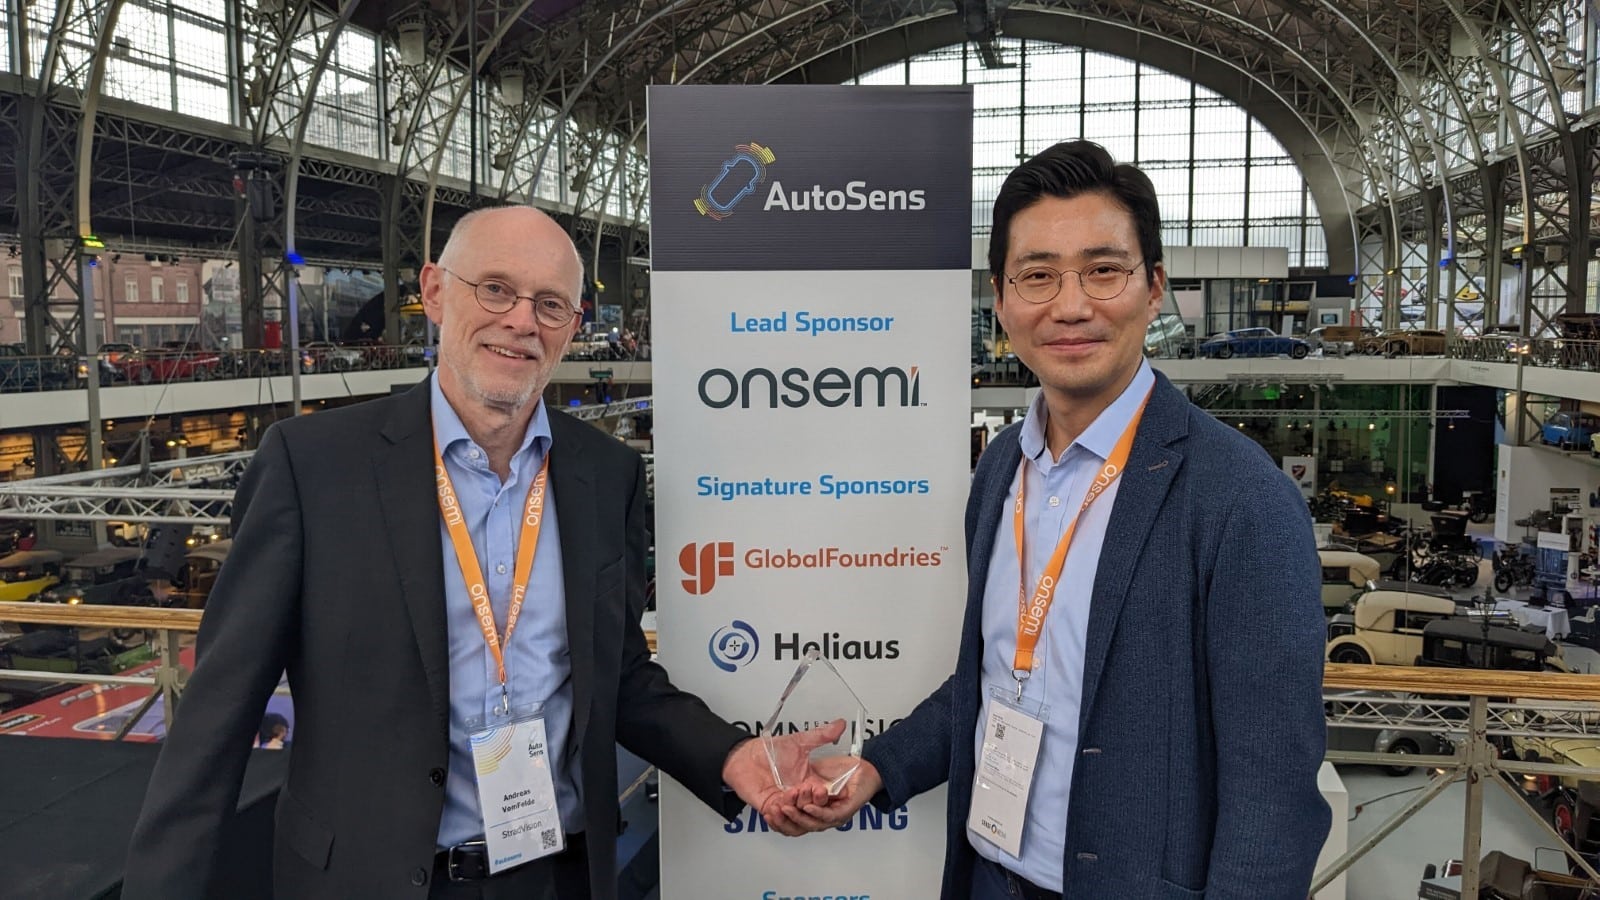 StradVision again won 'Best-in-Class Software for Perception Systems' during the 2022 AutoSens Awards in Brussels, Belgium.